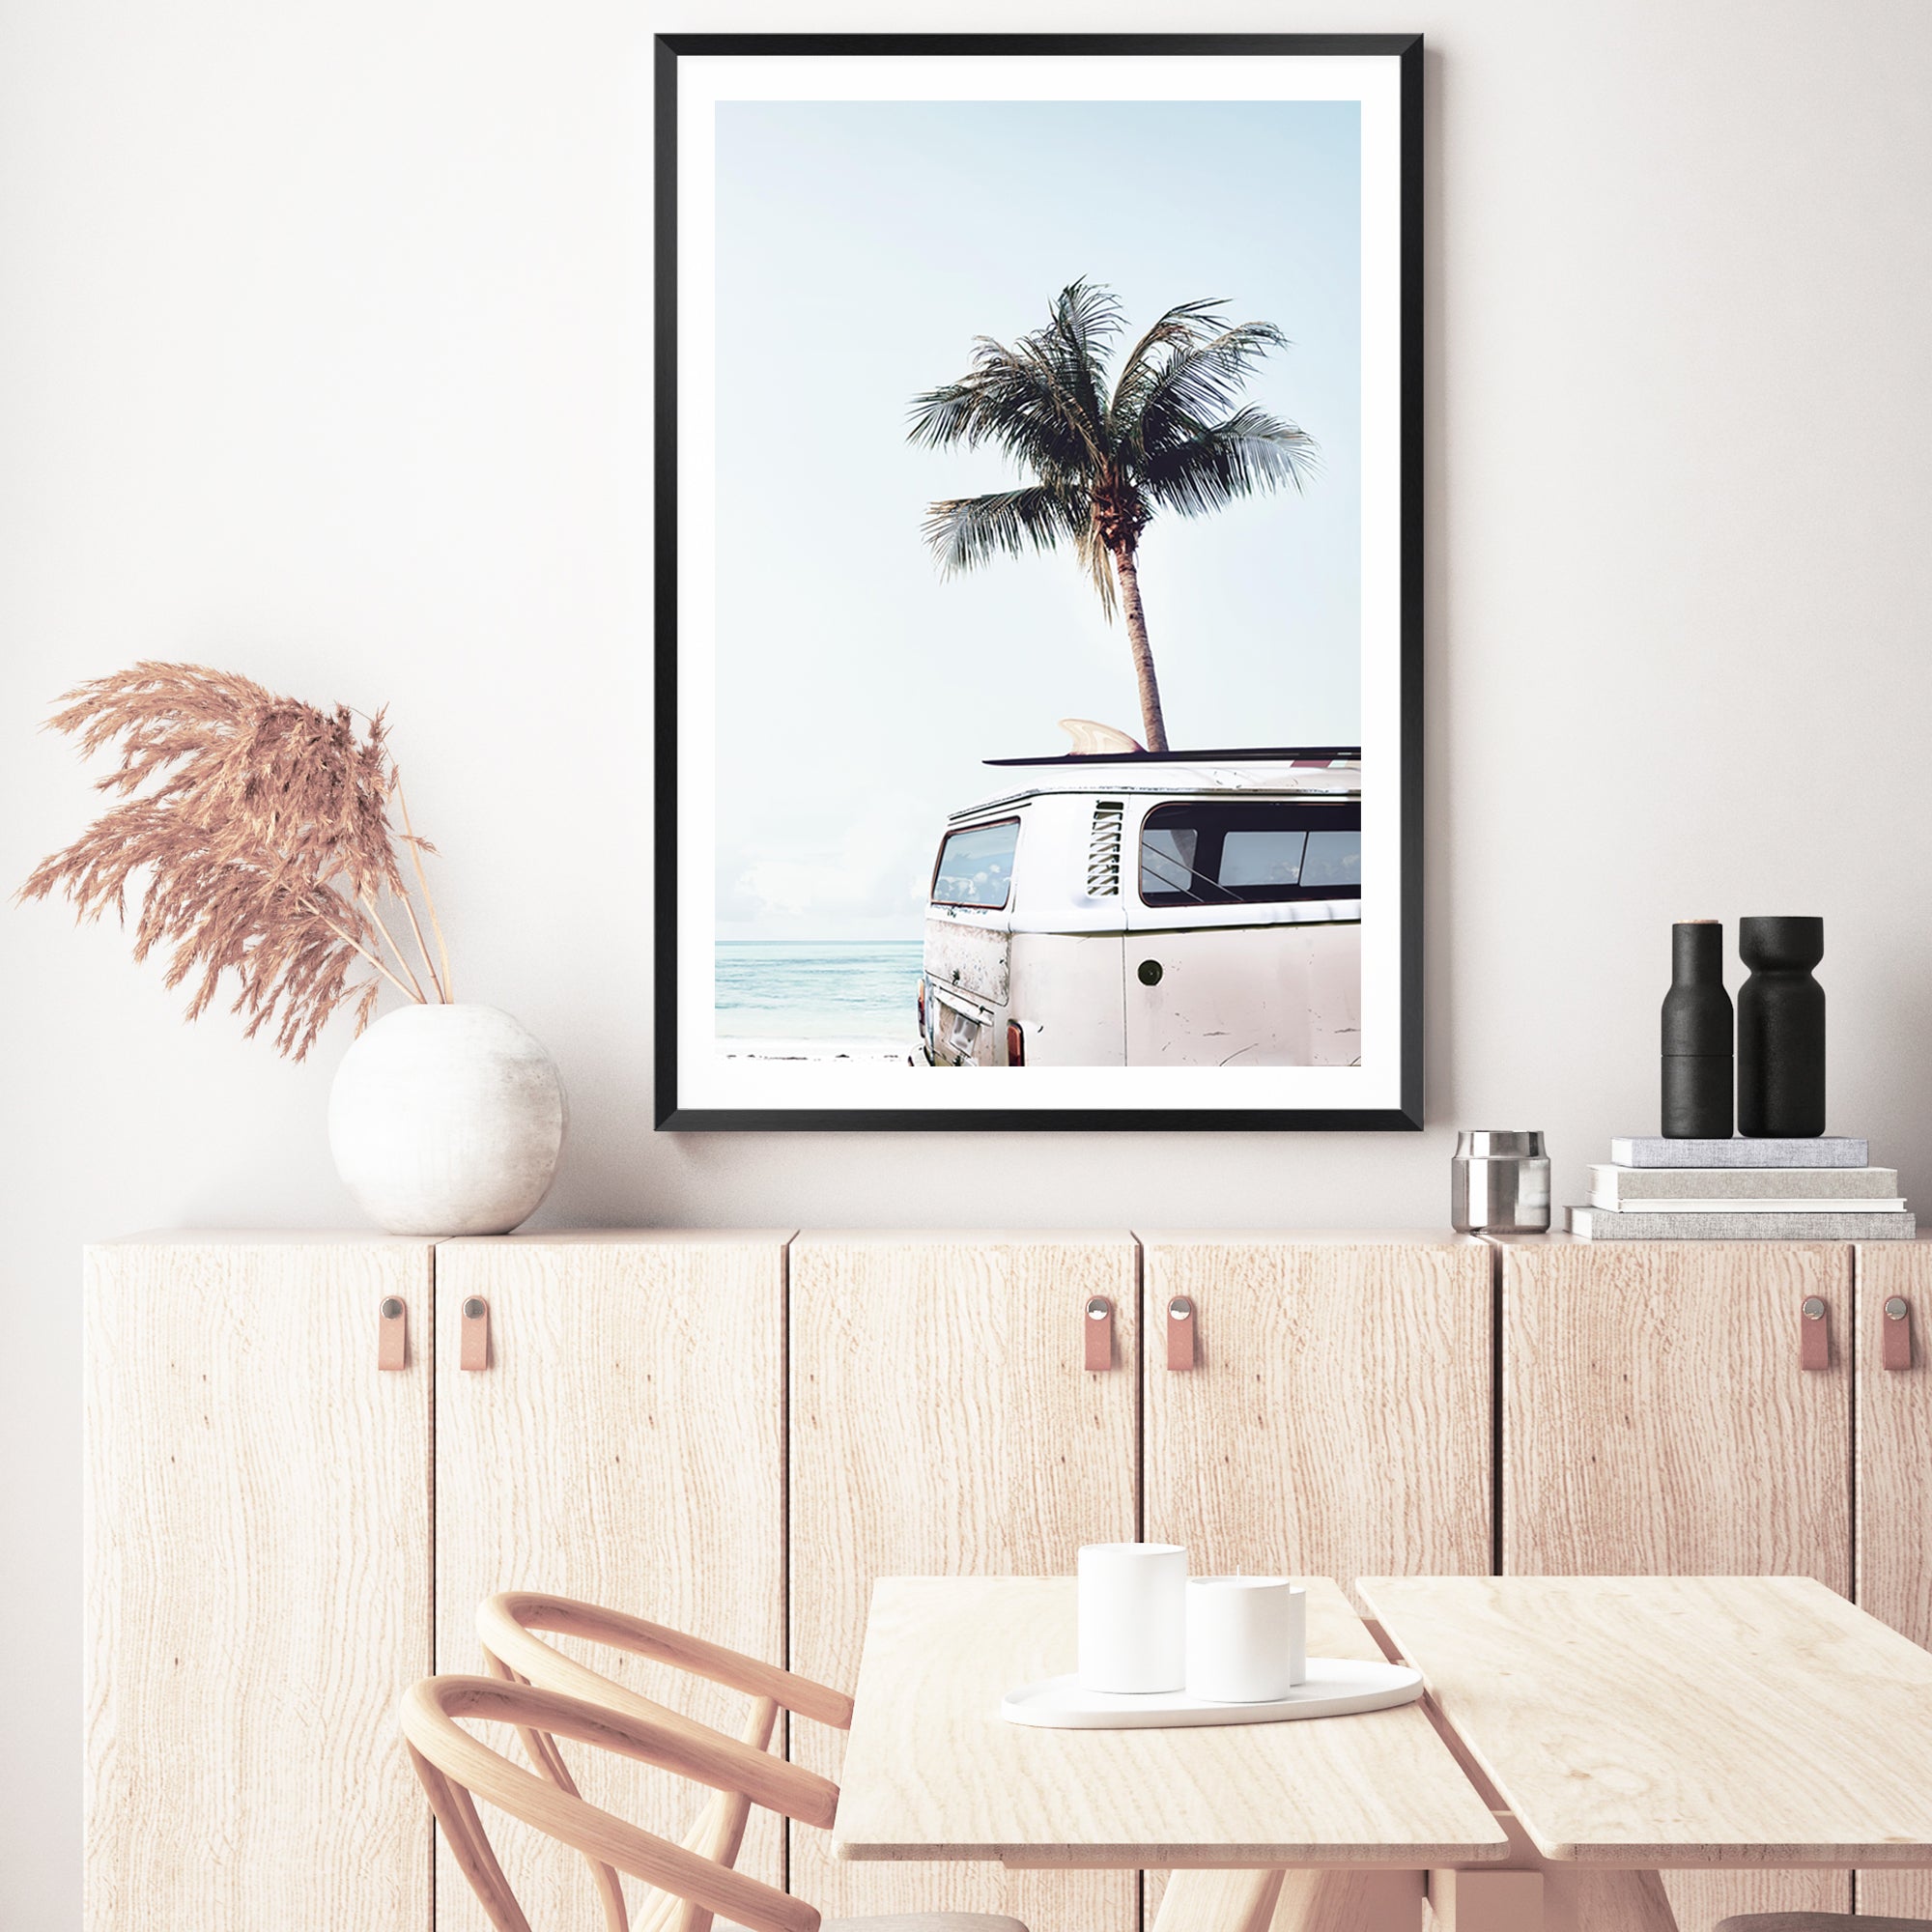 A blue Kombi van at the beach with a blue sky and palm trees available in a photo or canvas artwork.